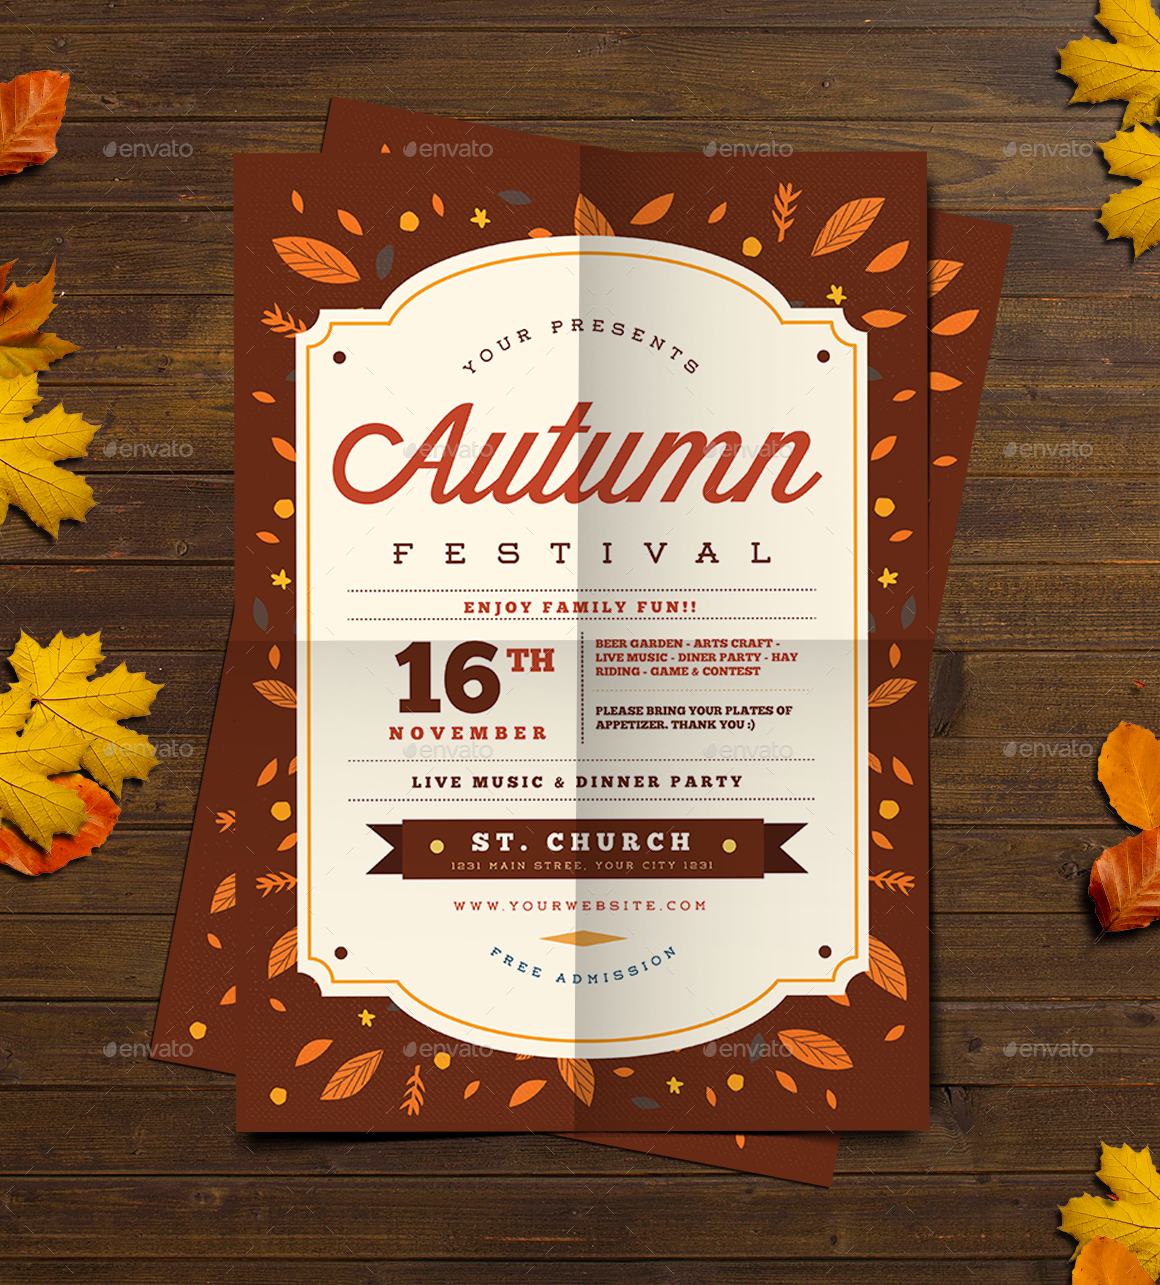 Autumn Festival Celebration Flyer by Guuver | GraphicRiver